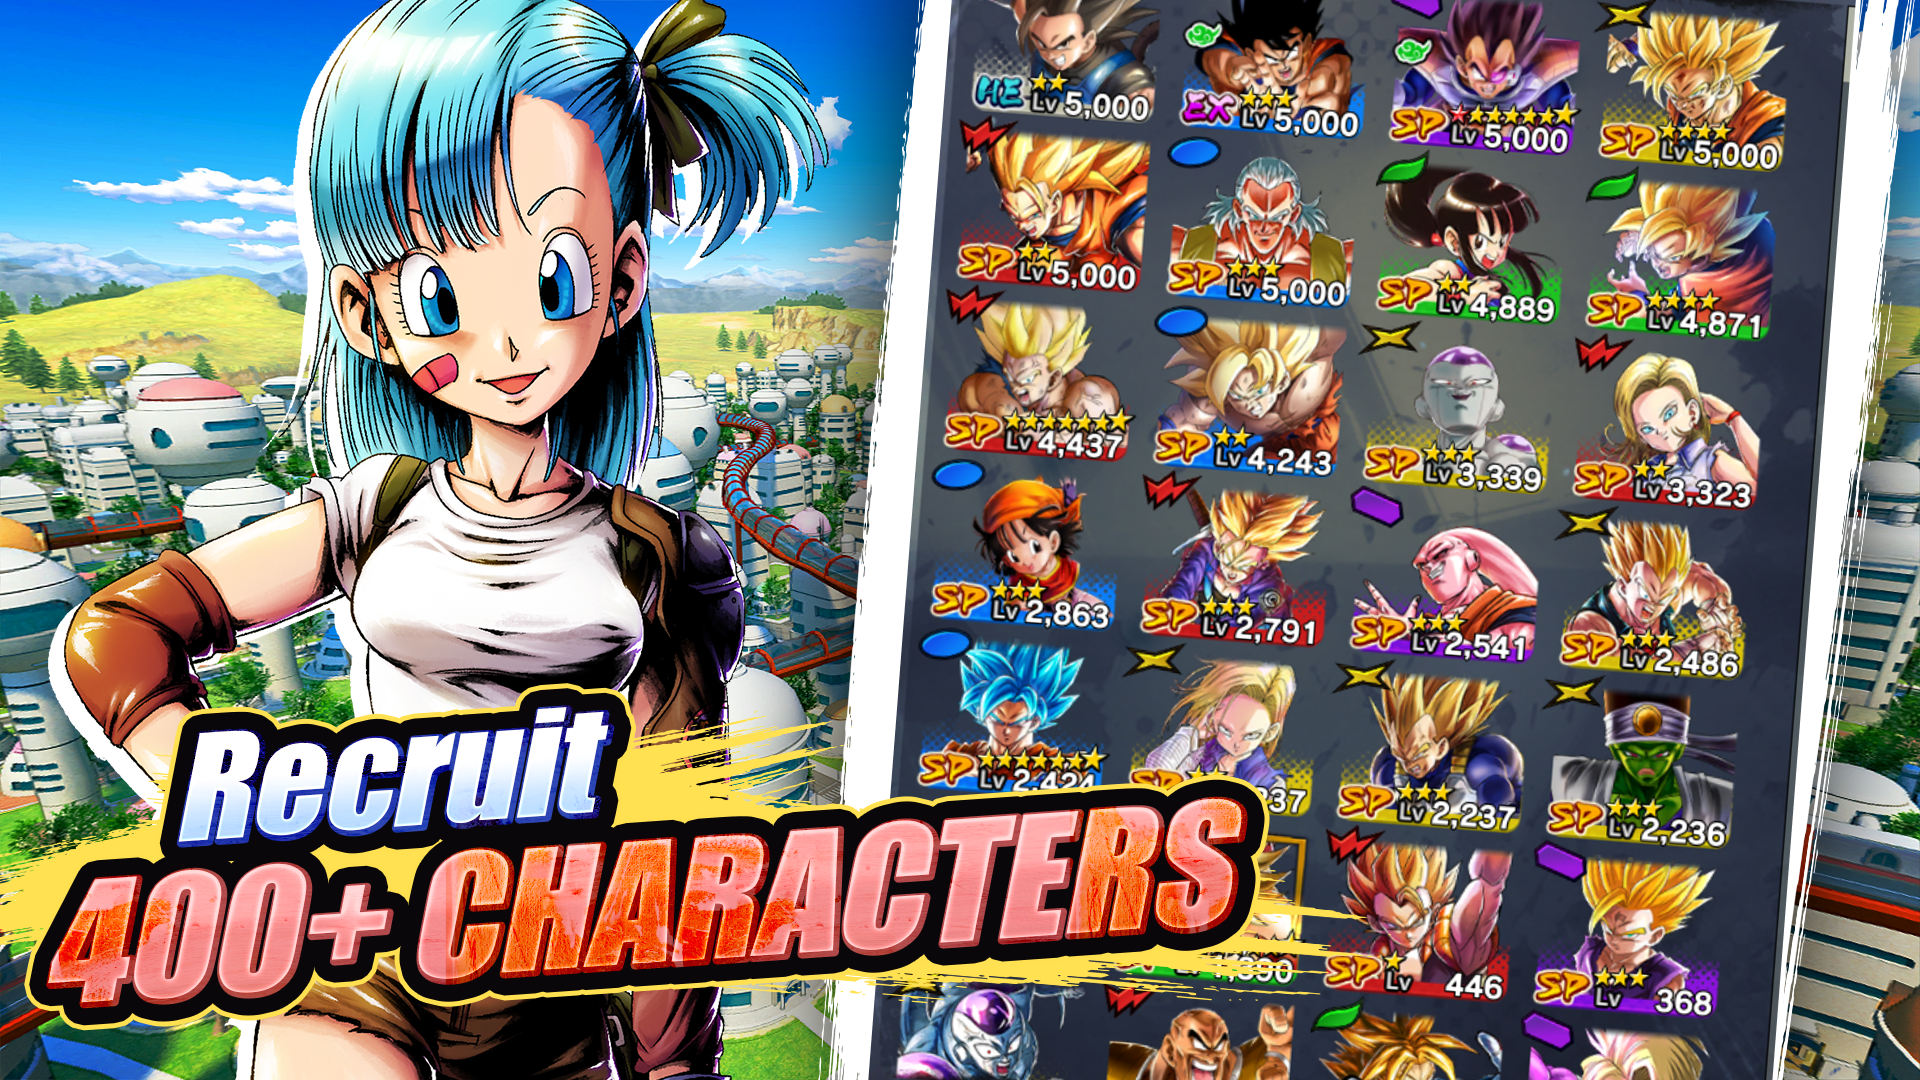 12 Free Best DRAGON BALL Game Android iOS High Graphic (NO EMULATOR) Dragon  Ball Game ONLINE OFFLINE 